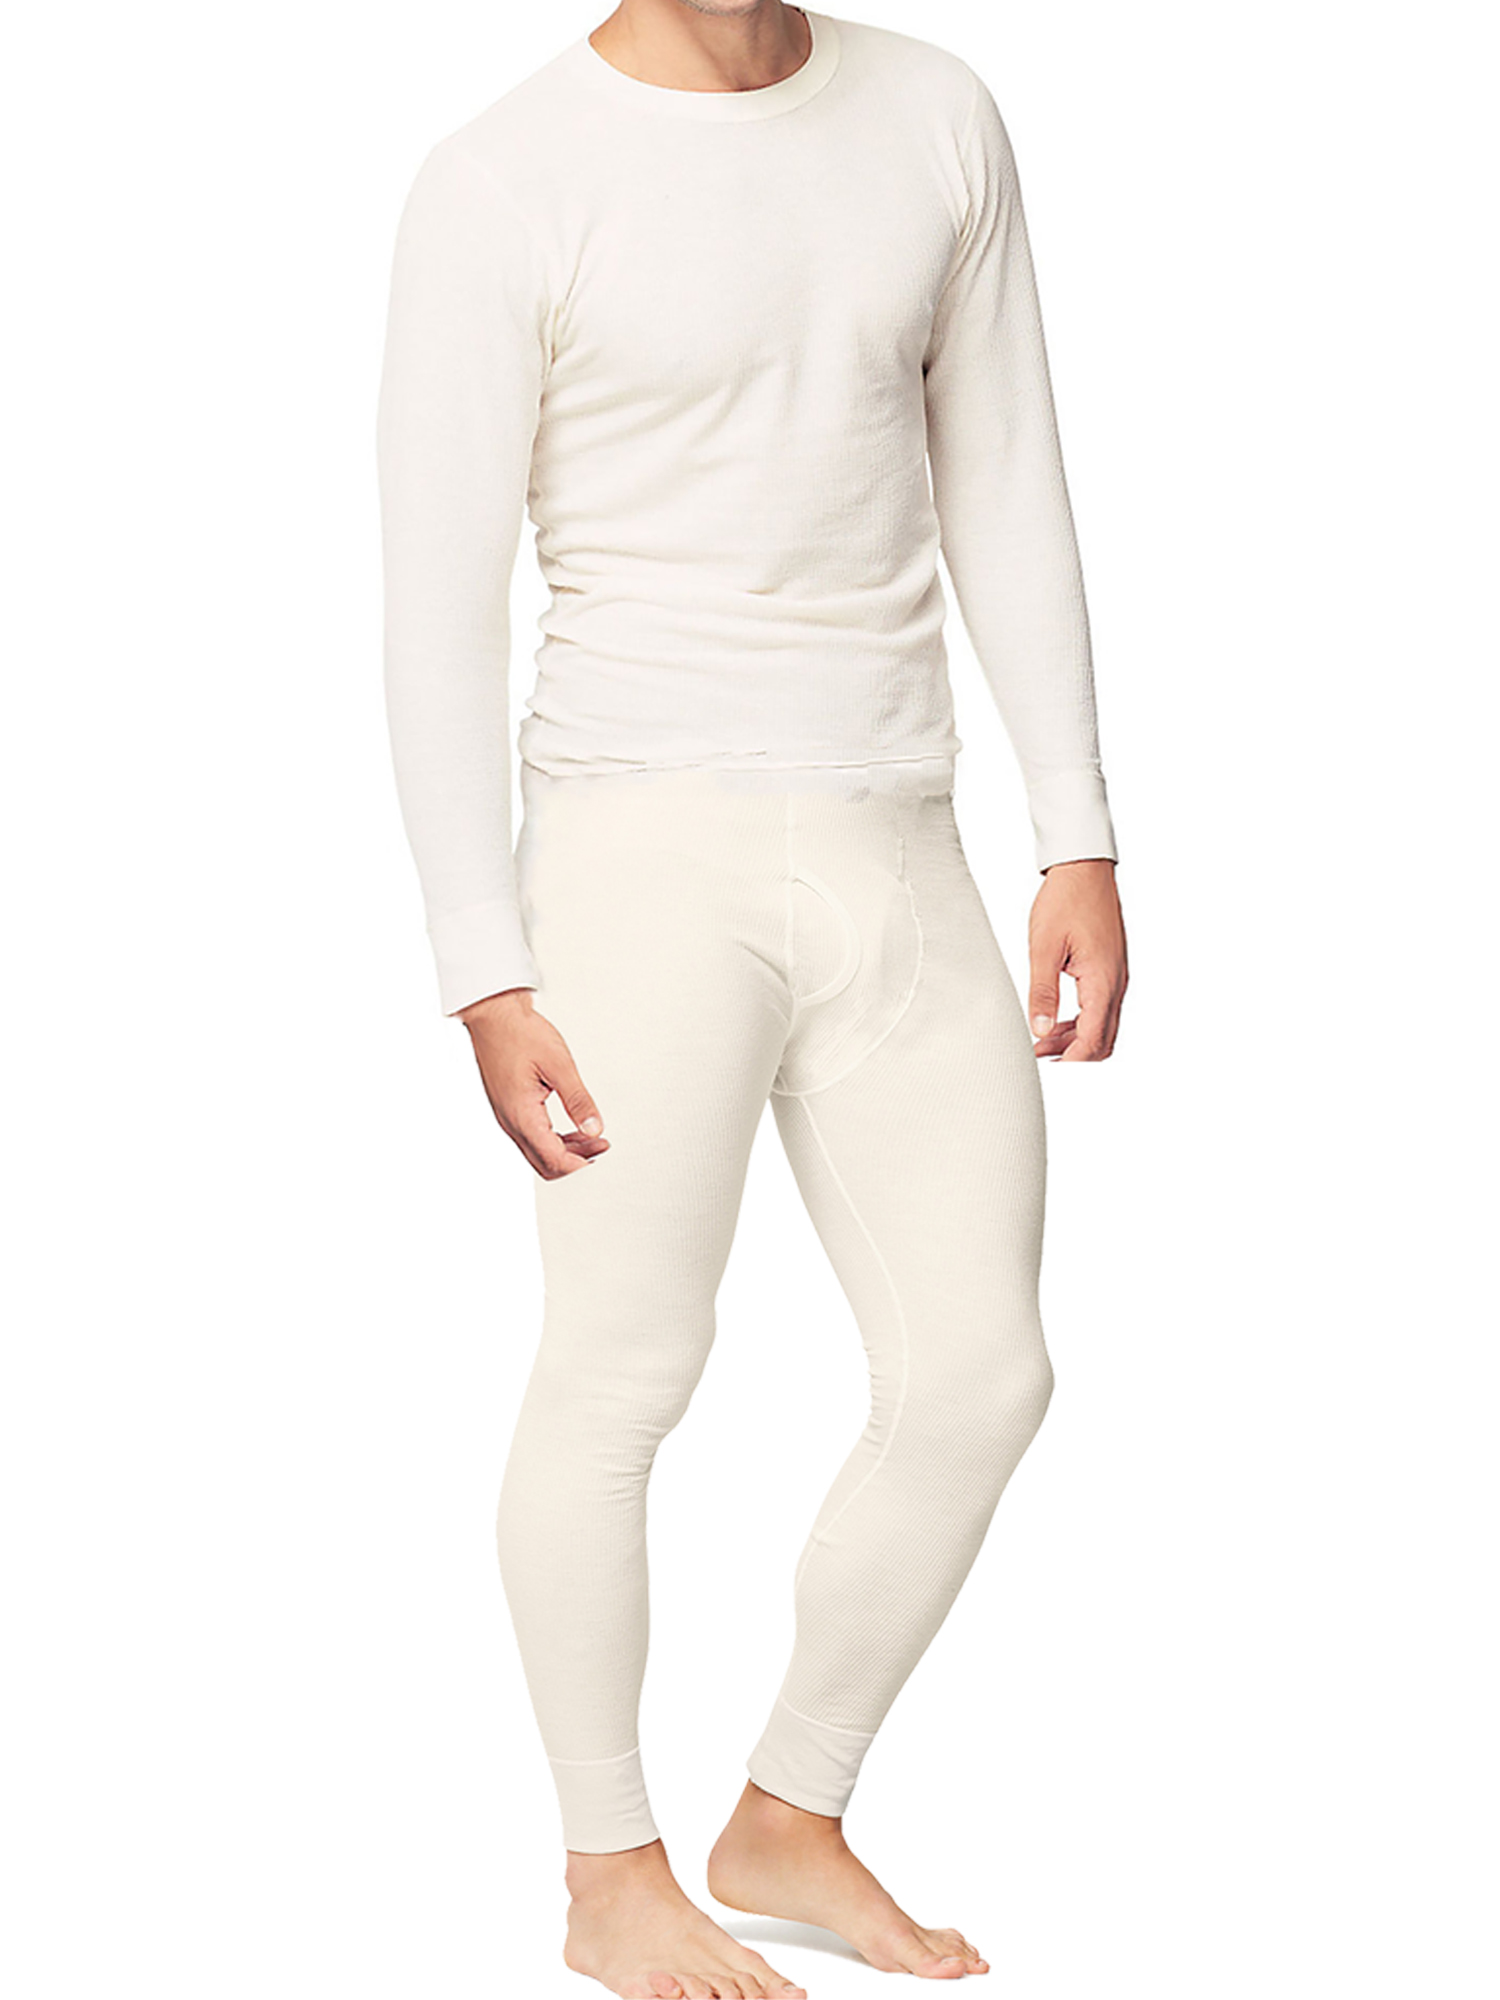 Place and Street Mens 2pc Thermal Underwear Set Bhutan